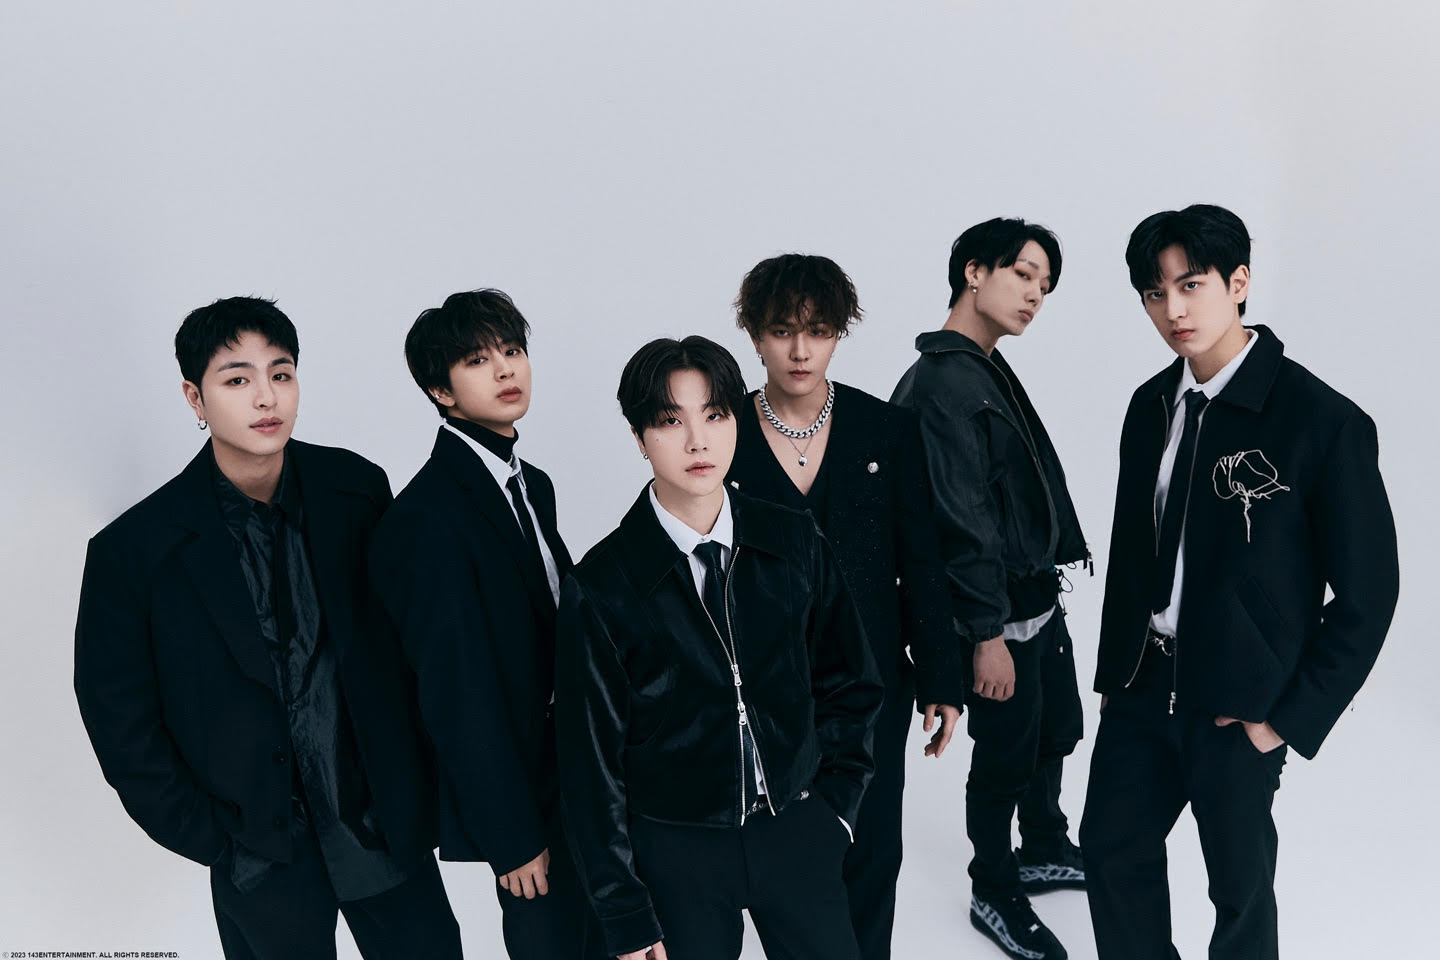 「iKON」がテレビ東京のKーPOP新番組「Who is your next? THE KLOBAL STAGE」の初回ゲストに決定